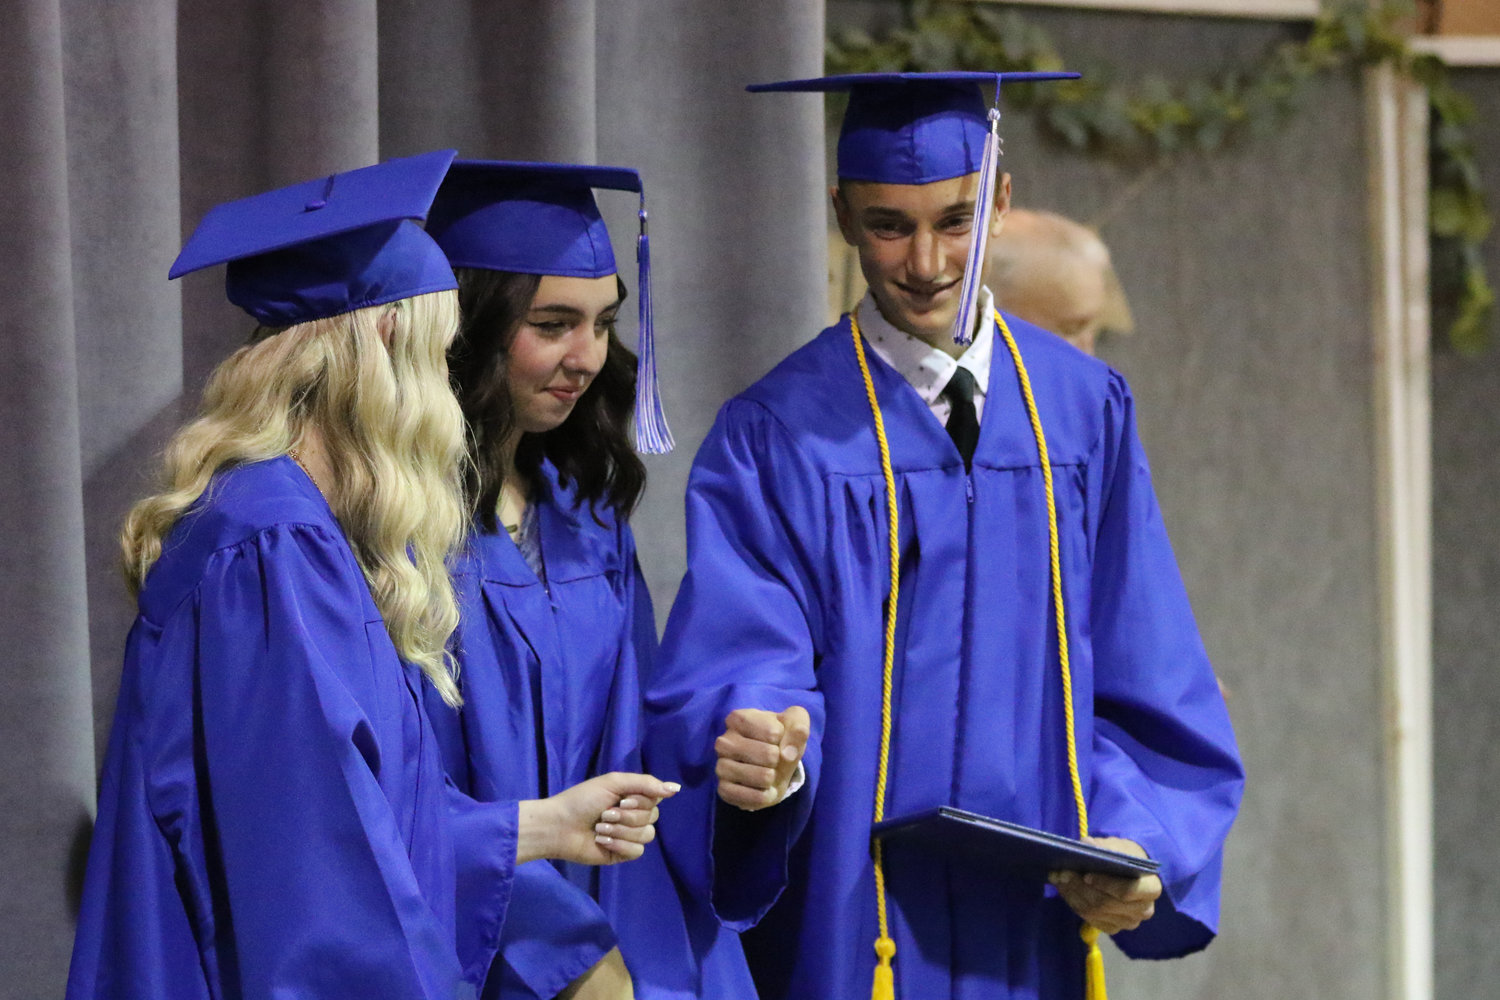 Mariah Miller and Jamison Stutzman share a post-graduation first bump during Pathway Christian School's graduation ceremony on May 16, 2021.